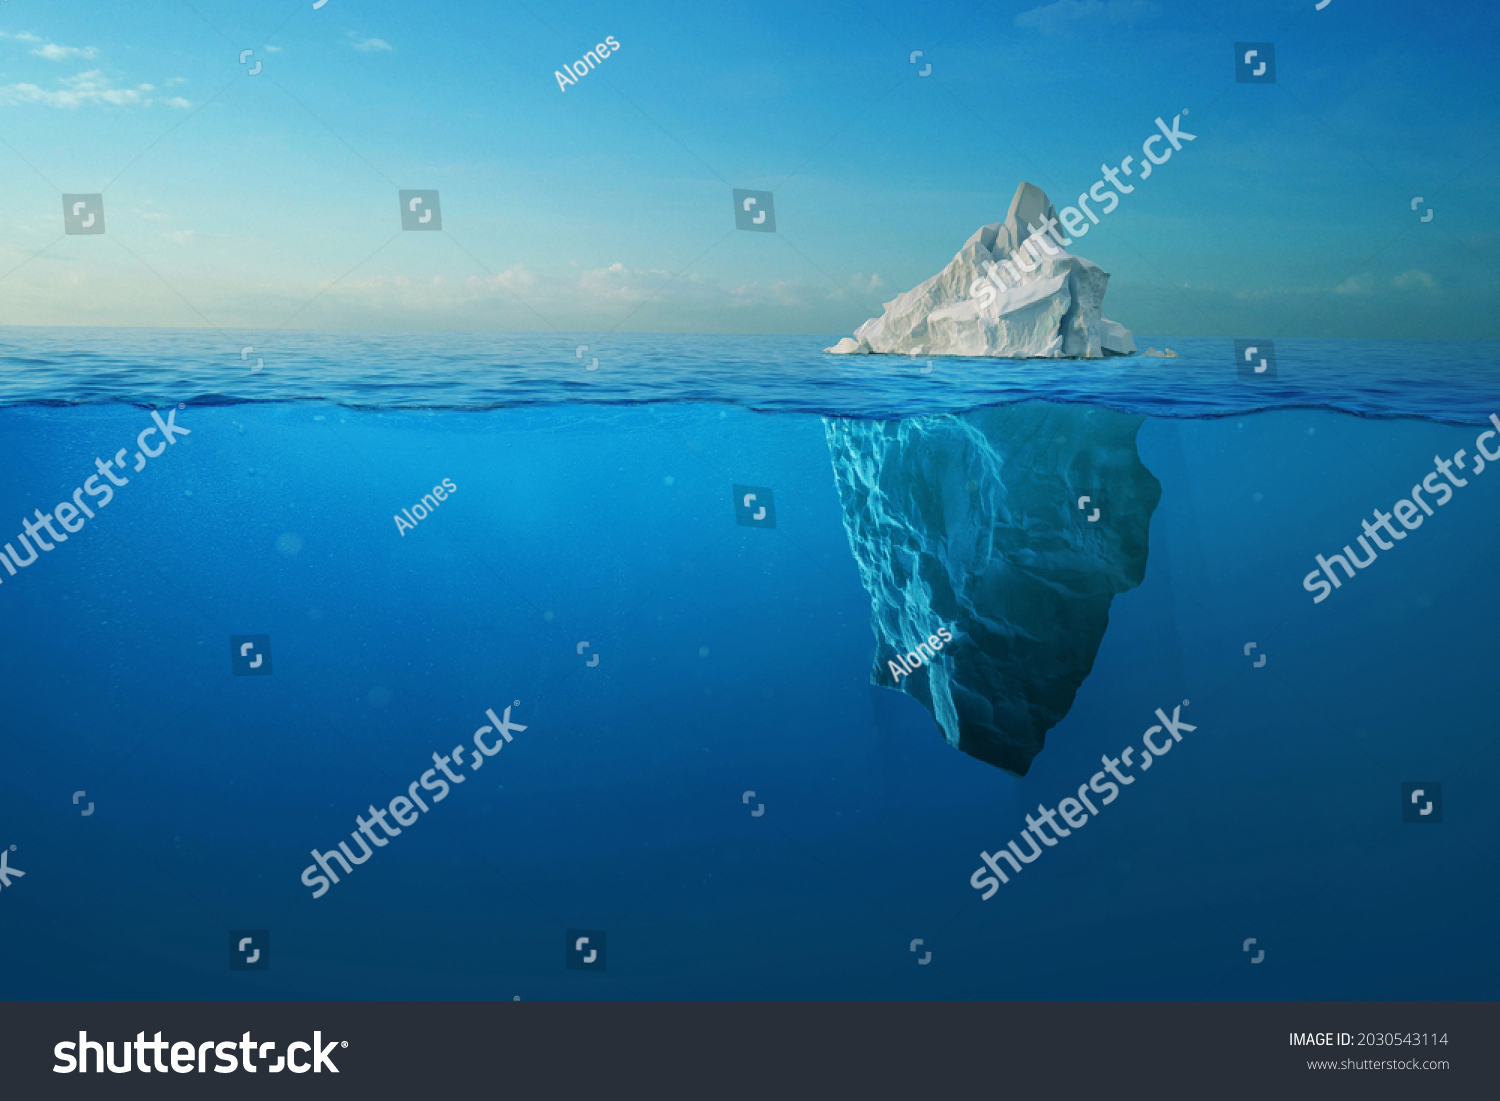 Iceberg With Above And Underwater View Taken In Greenland. Iceberg - Hidden Danger And Global Warming Concept. Iceberg illusion creative idea #2030543114